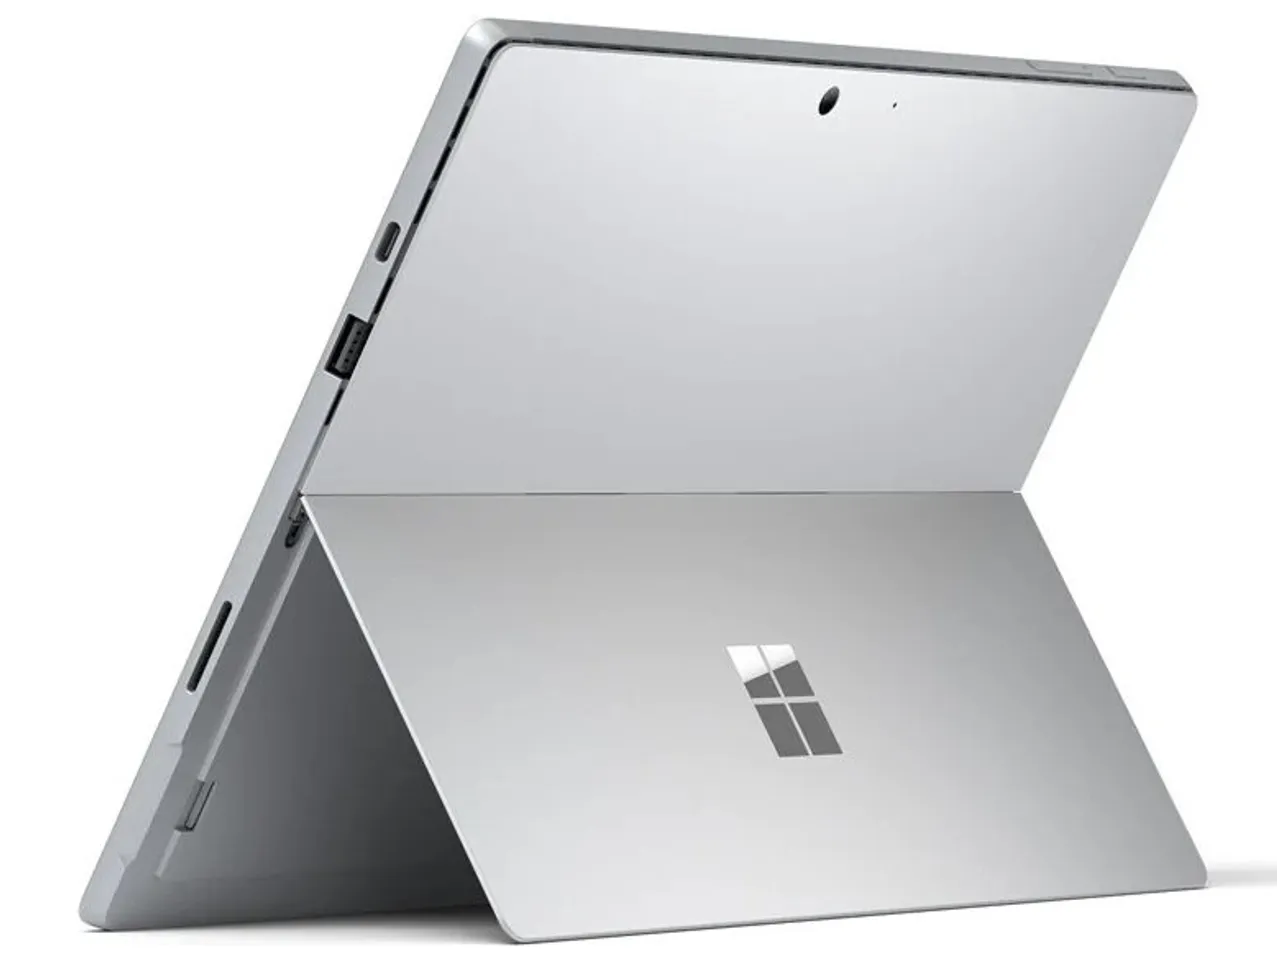 Microsoft Updates Original Surface Duo to Android 11